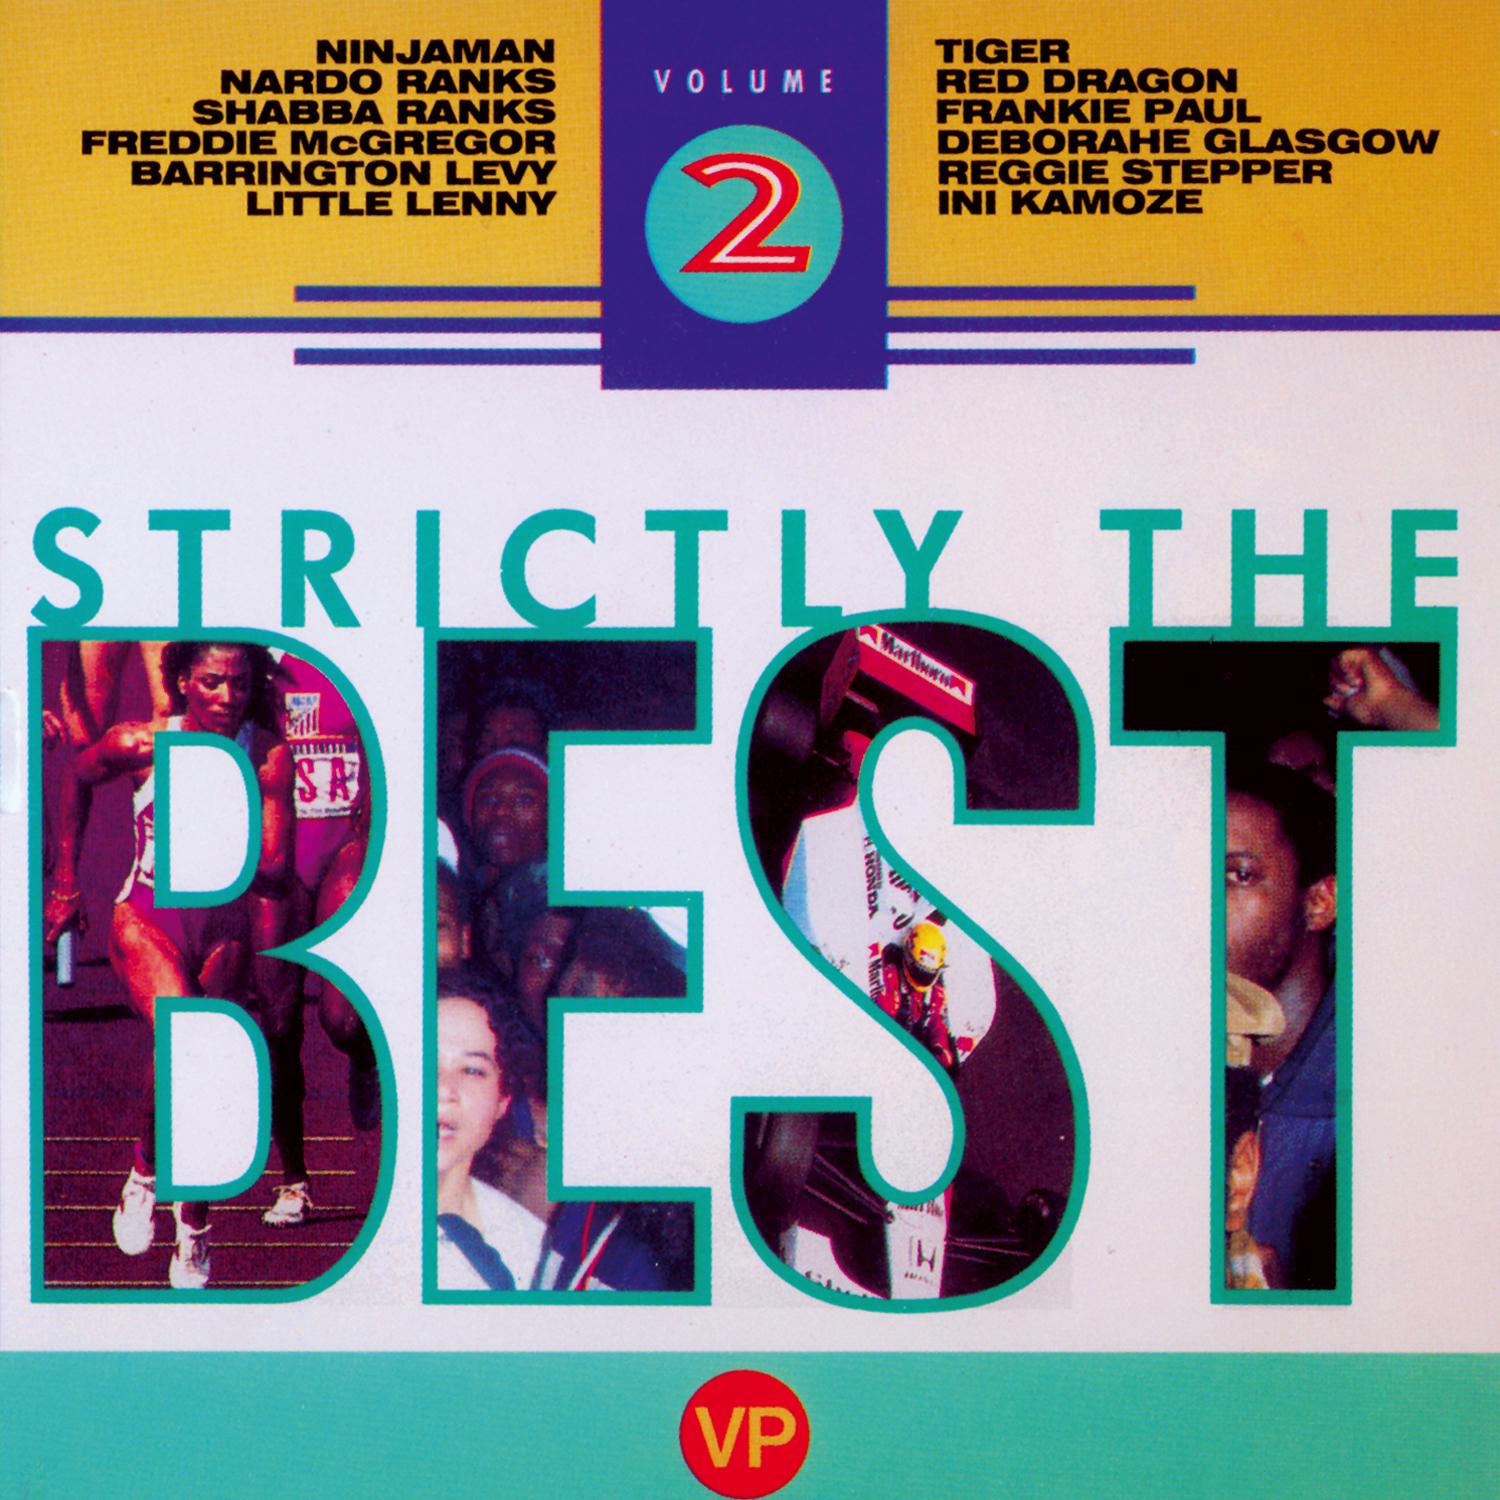 Strictly The Best Vol. 2